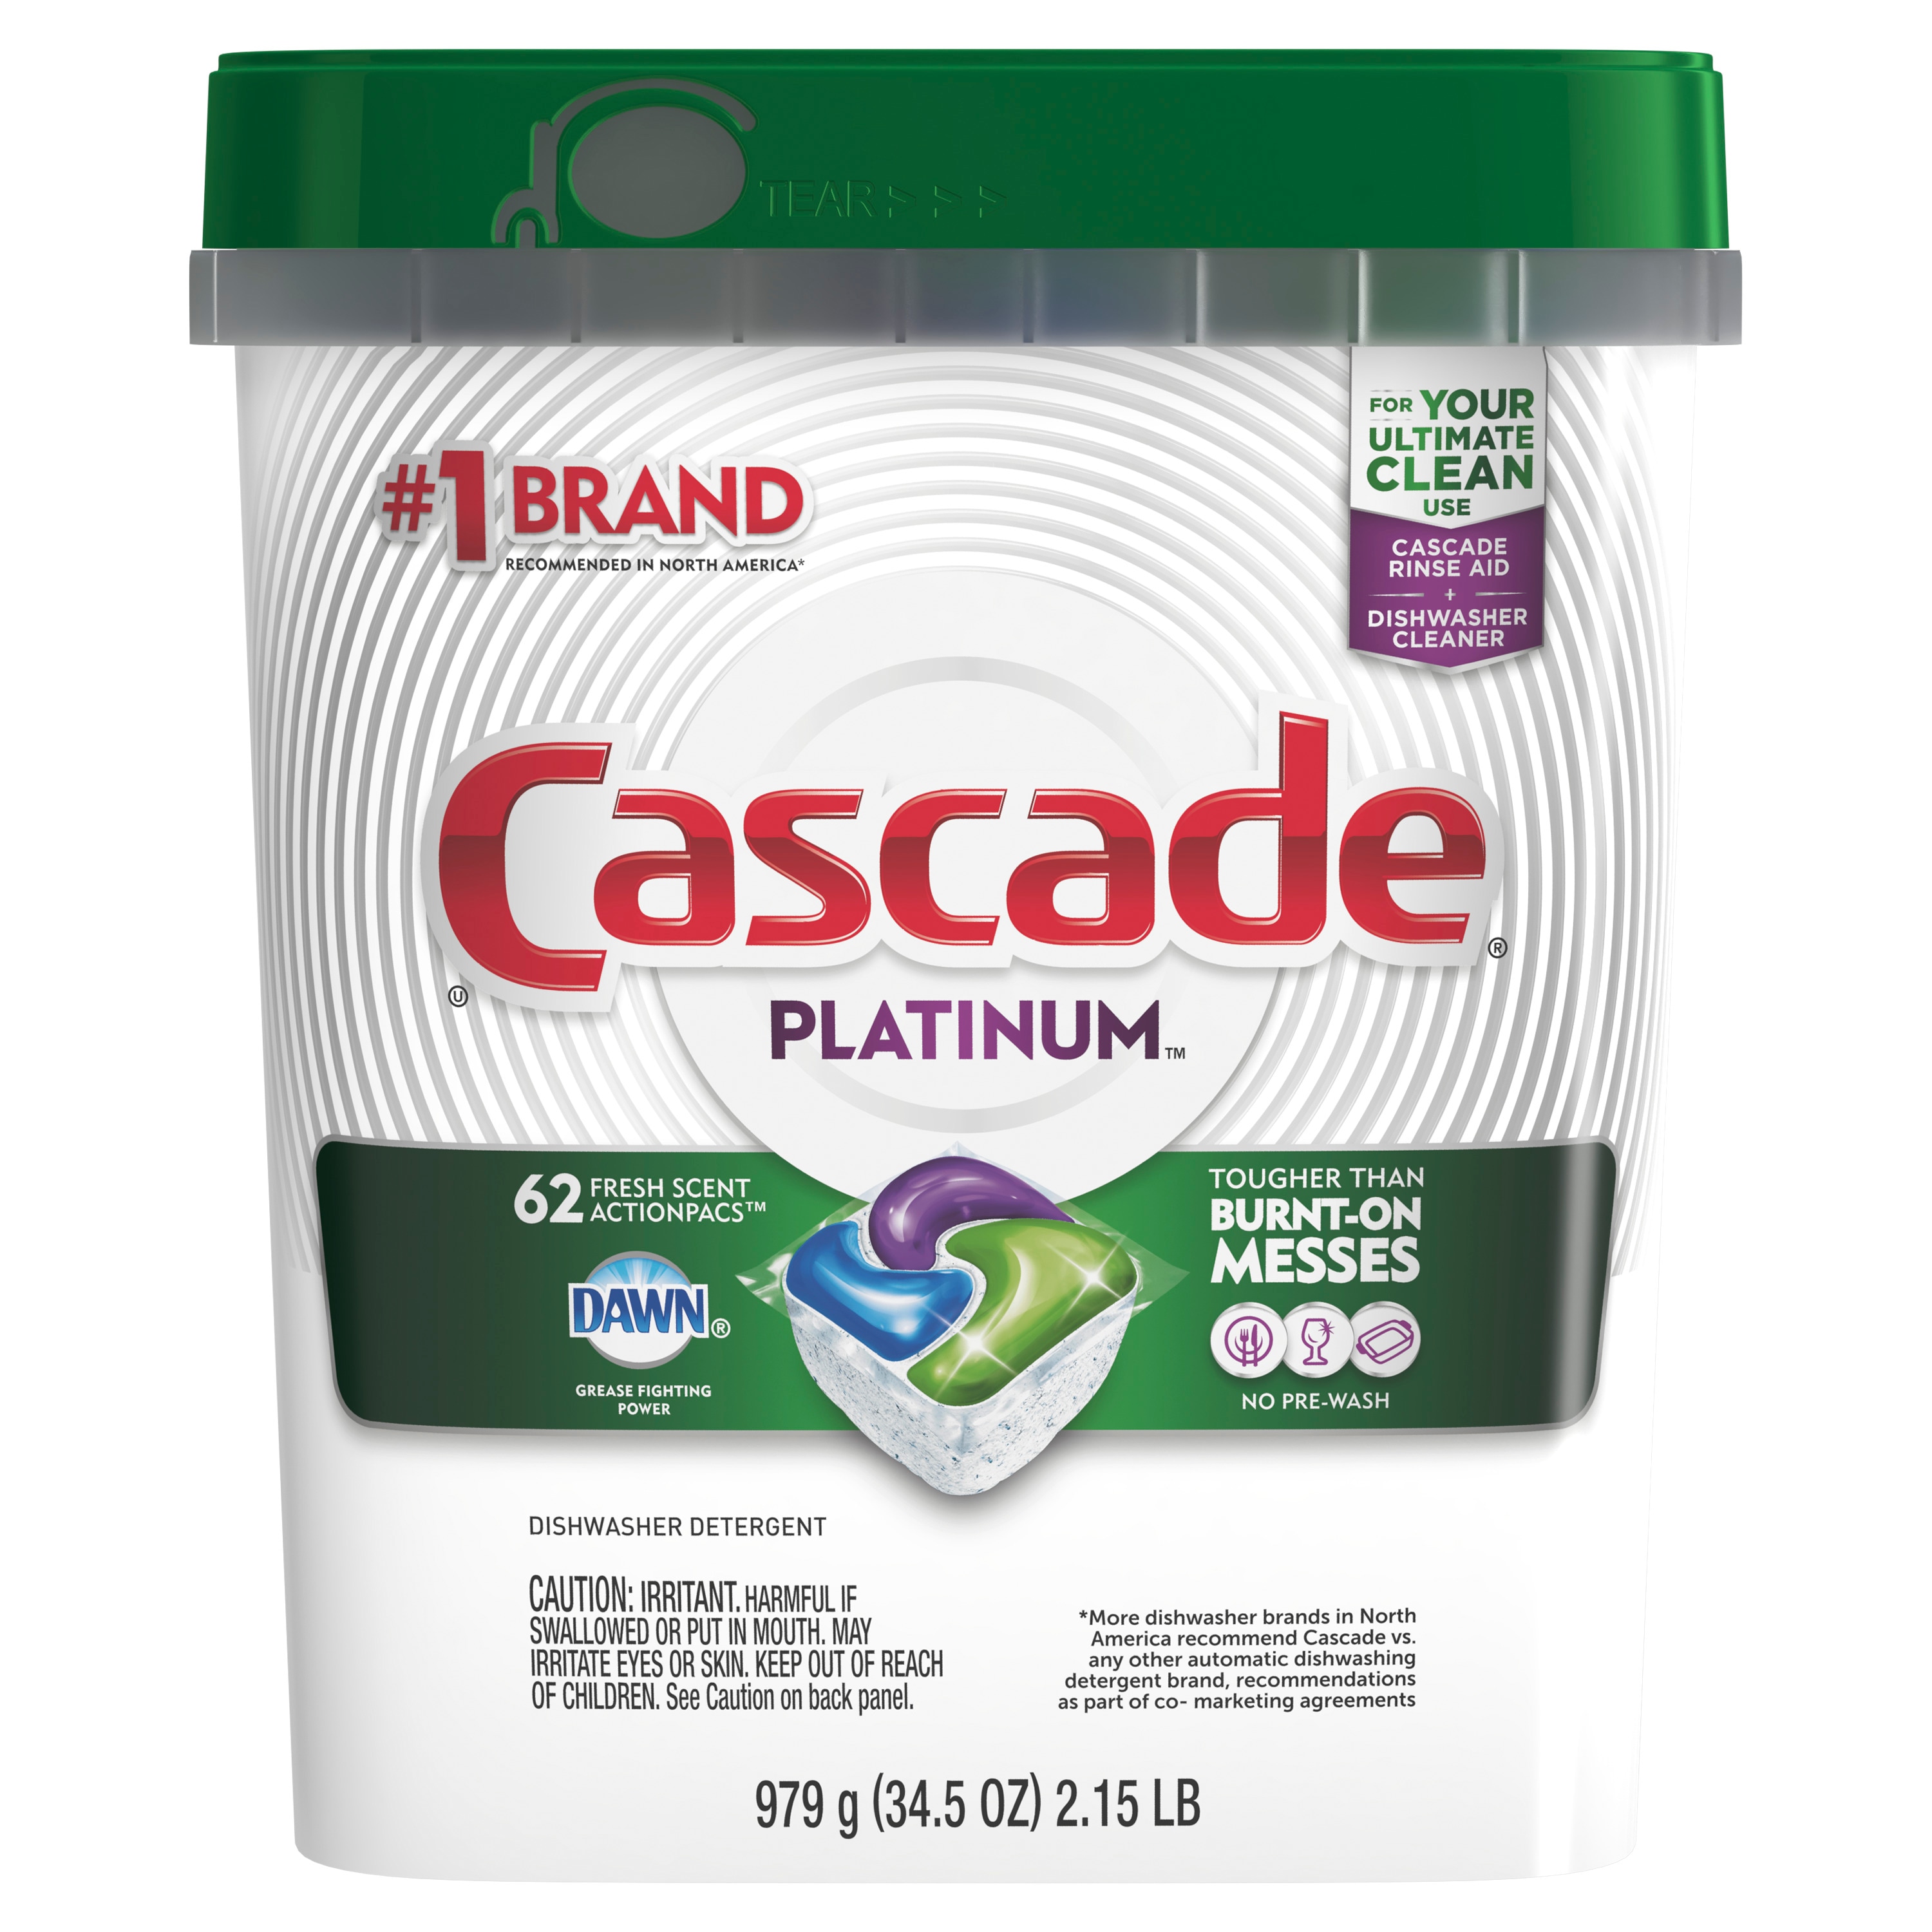 Give Your Dishes Cascade's Ultimate Clean